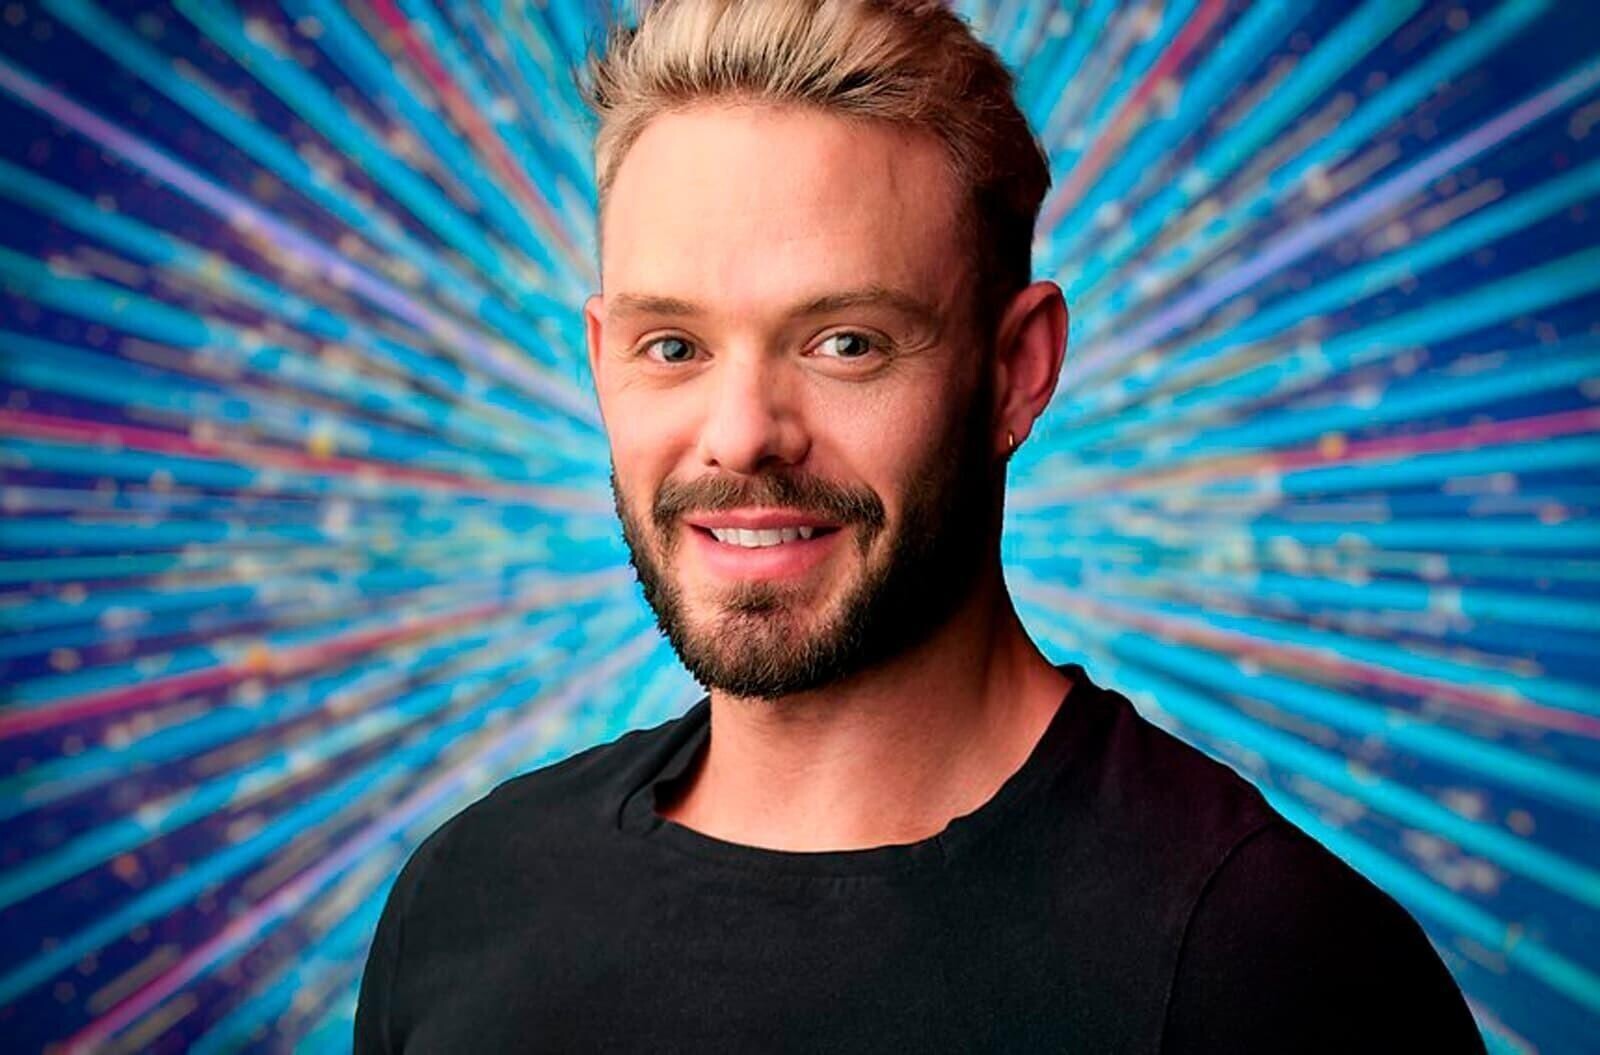 John Whaite is Strictly Come Dancing's first all male pairing